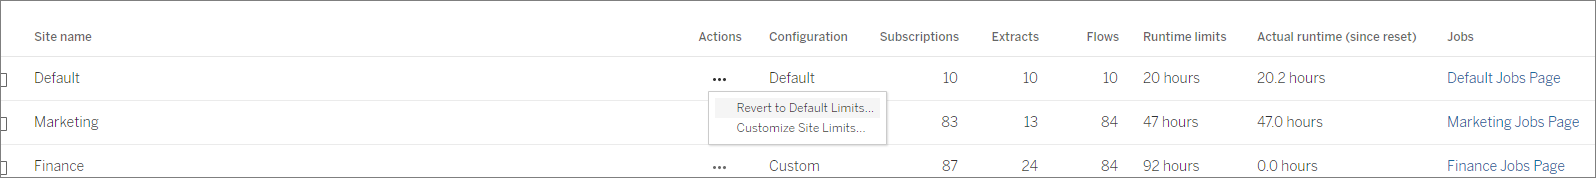 image shows a screenshot of the list of sites on the resource limits tab of the setting page where you can set custom limits for a site.